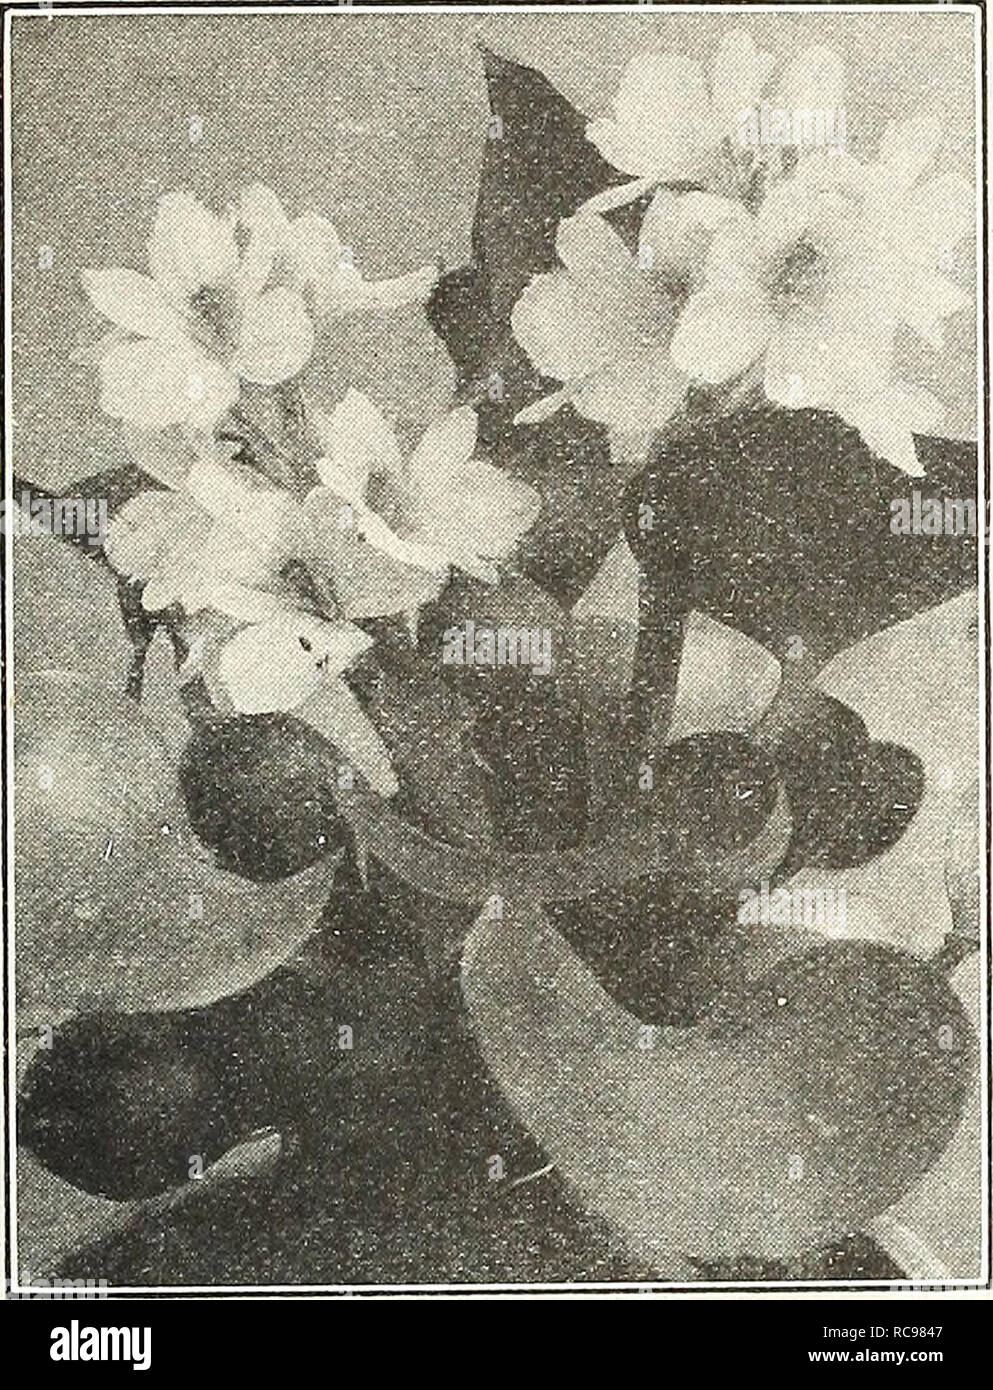 . Dreer's garden book 1924. Seeds Catalogs; Nursery stock Catalogs; Gardening Equipment and supplies Catalogs; Flowers Seeds Catalogs; Vegetables Seeds Catalogs; Fruit Seeds Catalogs. pfJAMll MffERLILIES^ AQUATICS A 209 SCELLANEOUS AQUATICS. EiCHHORNiA (Water Hyacinth) For marginal and shallow water planting. Acorus Japonicus Variegatus (Variegated Sweet Flag). 25 cts. each. Cyperus Alternifolius {Umbrella Planl). 25 cts. each; $2.50 per doz. Cyperus Papyrus (Papyrus Ajitiqiiorum). The true Egyptian Paper Plant. 50 cts. each; specimen plants in 11 in. tubs, $2.50 each. Eichhornia Azurea. Flowe Stock Photo